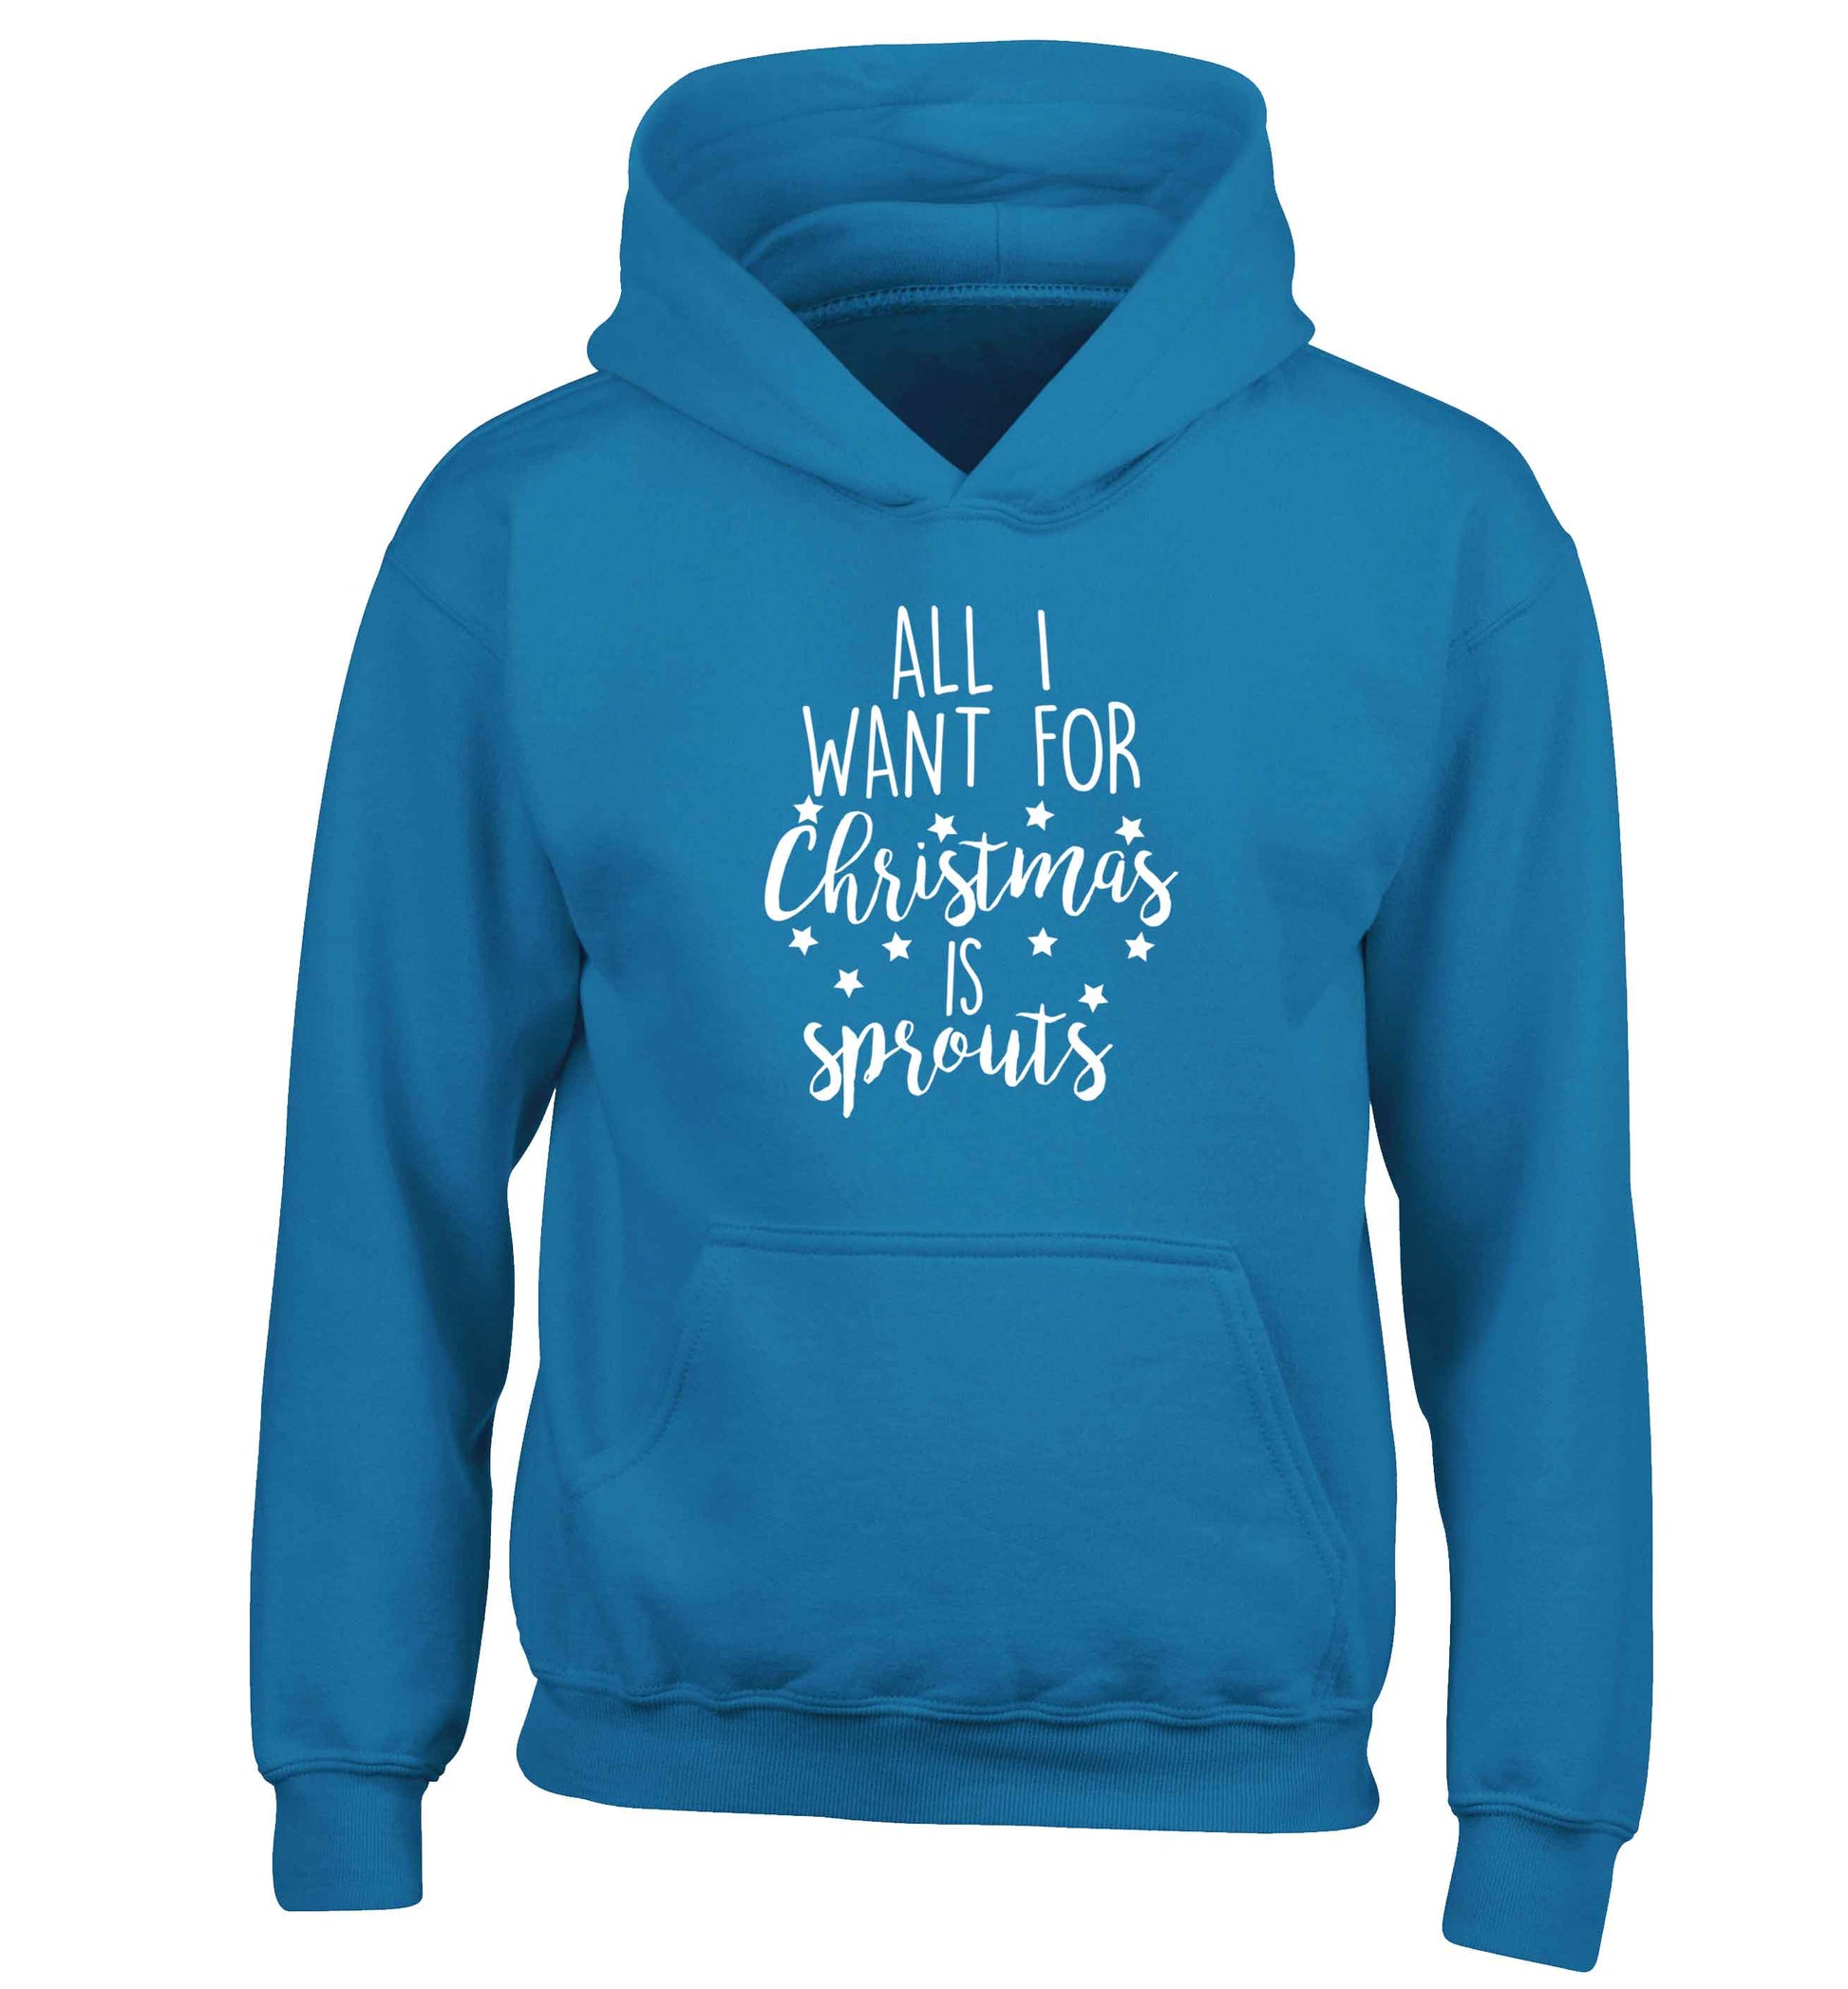 All I want for Christmas is sprouts children's blue hoodie 12-13 Years